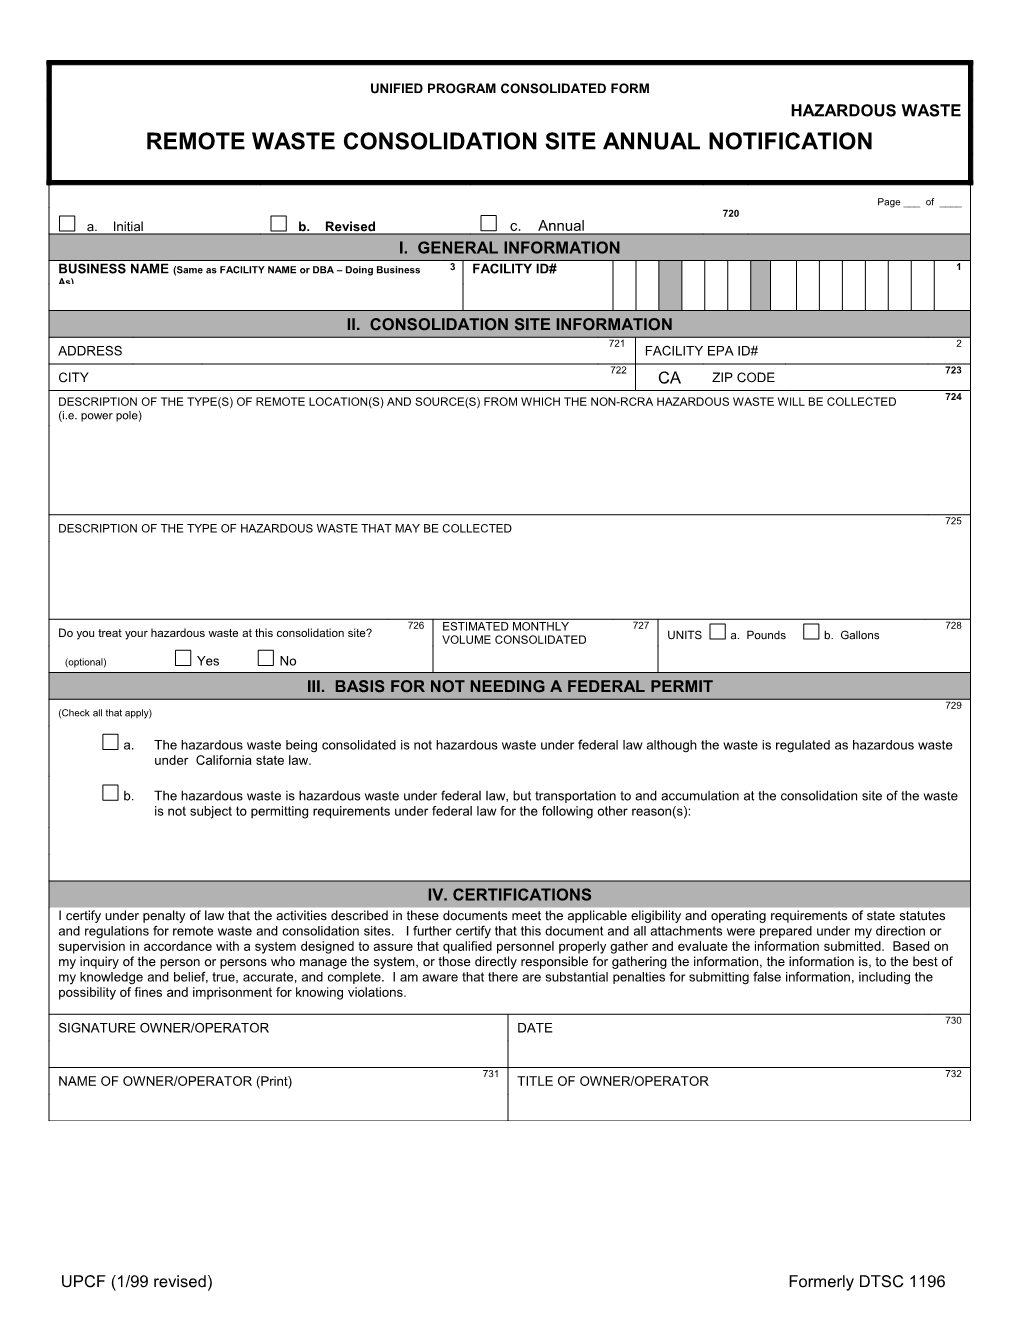 Unified Program Consolidated Form s2